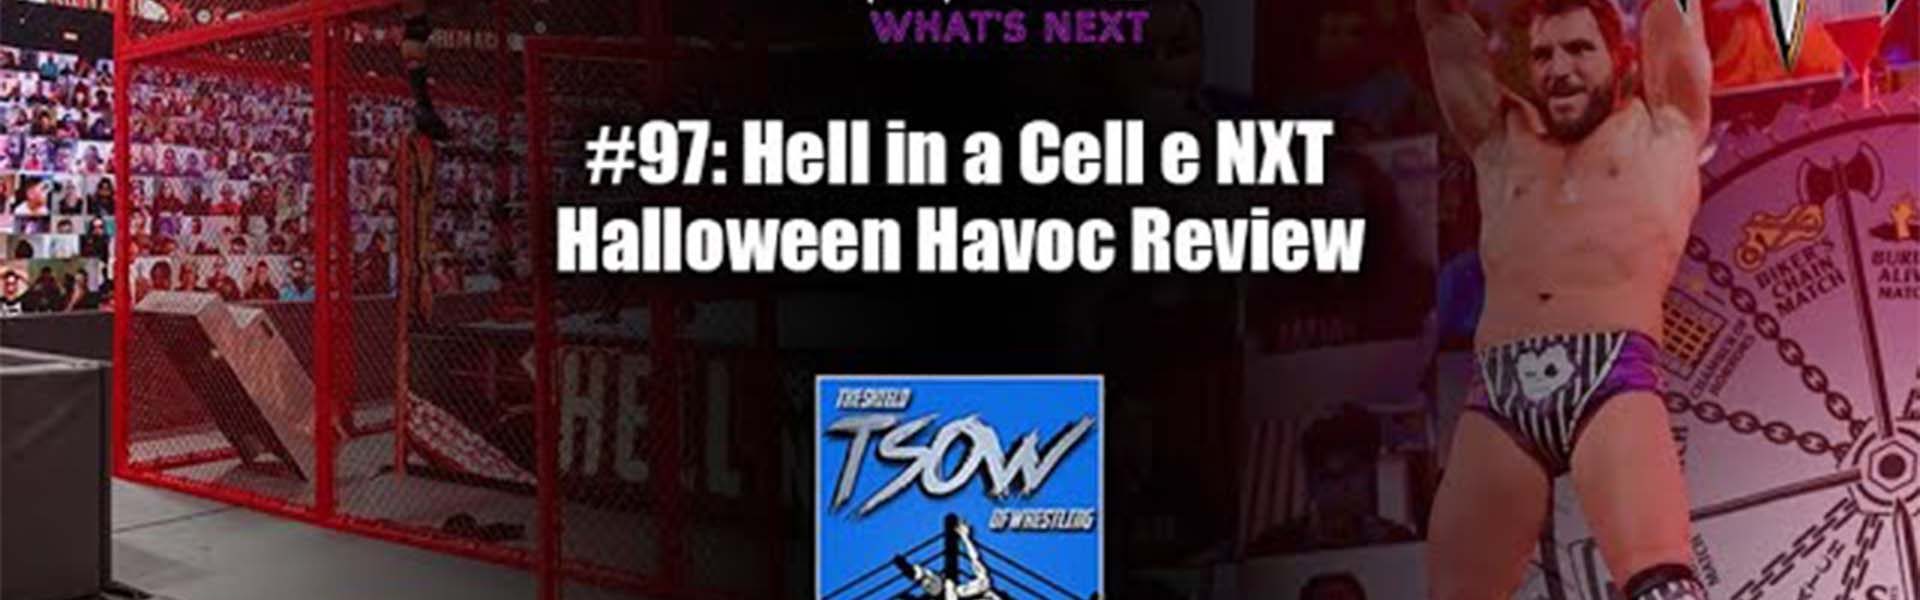 What’s Next #97: Hell in a Cell e NXT Halloween Havoc Review